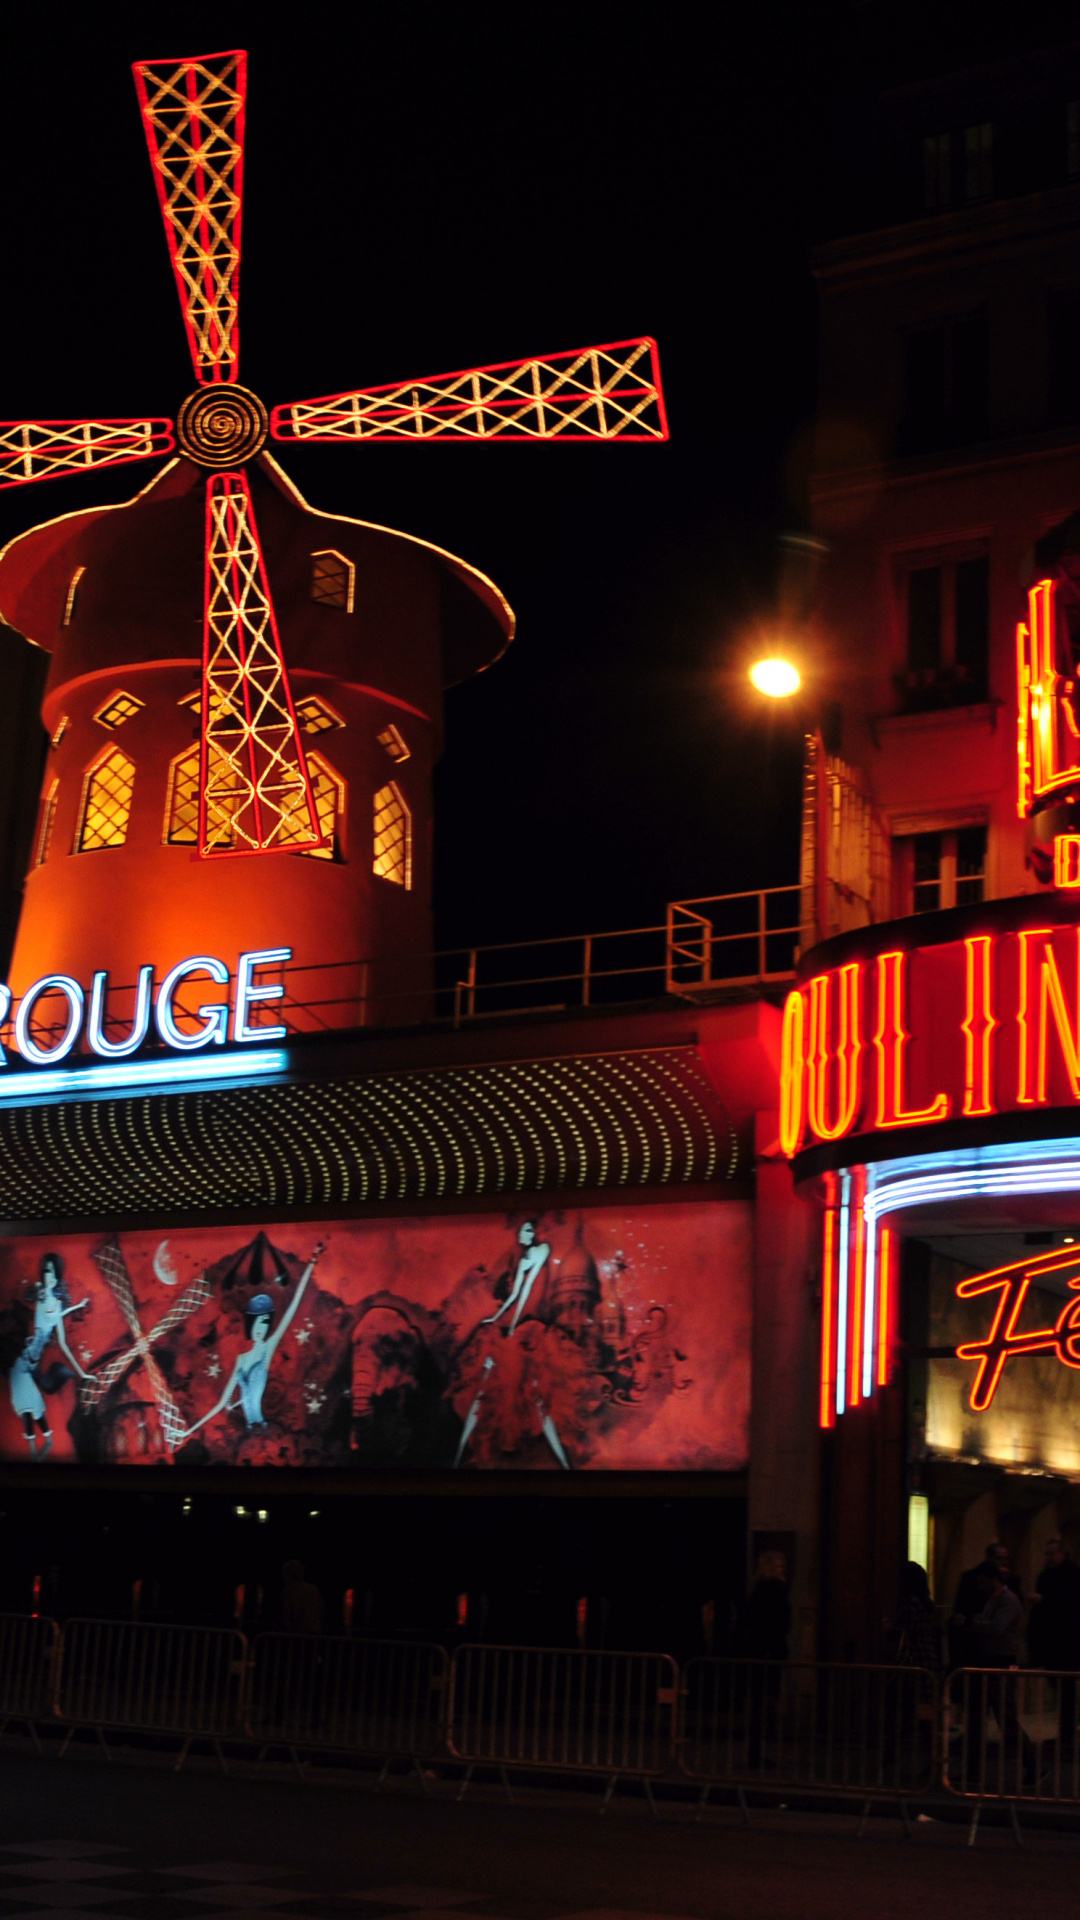 Moulin Rouge wallpapers, Rouge background, Travels expertise, Baton stores, 1080x1920 Full HD Handy